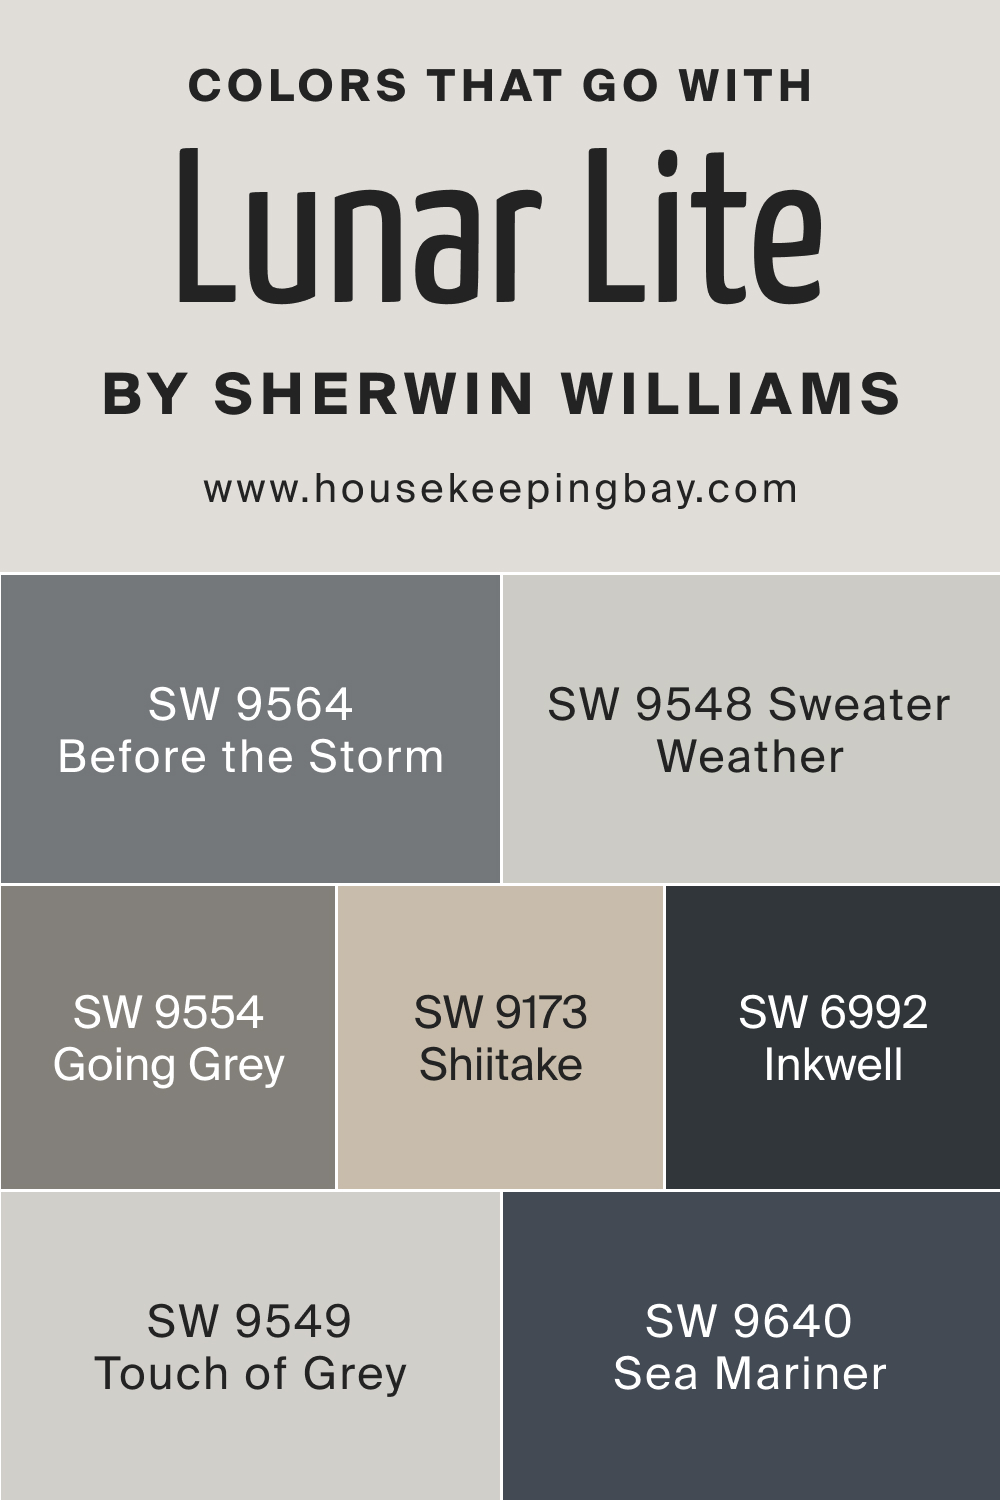 Colors that goes with SW 9546 Lunar Lite by Sherwin Williams